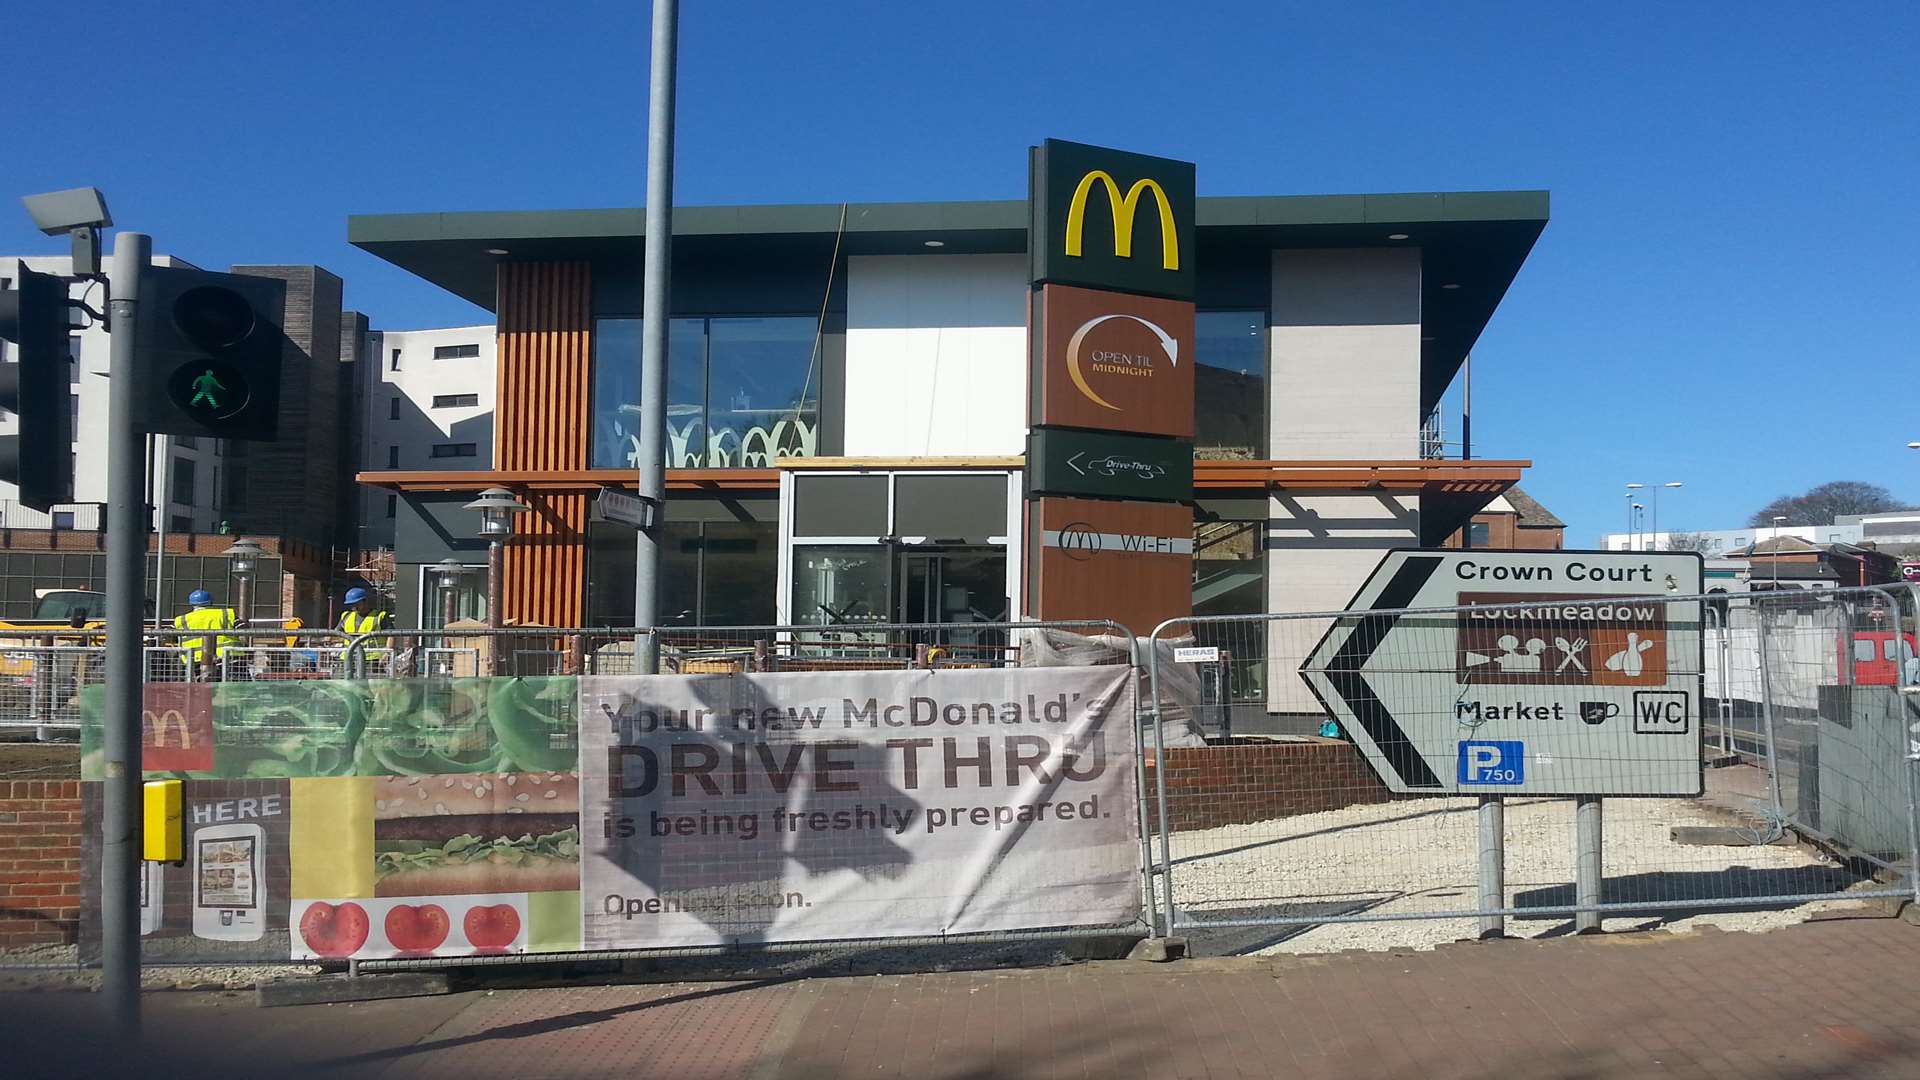 The McDonald's restaurant is still being constructed